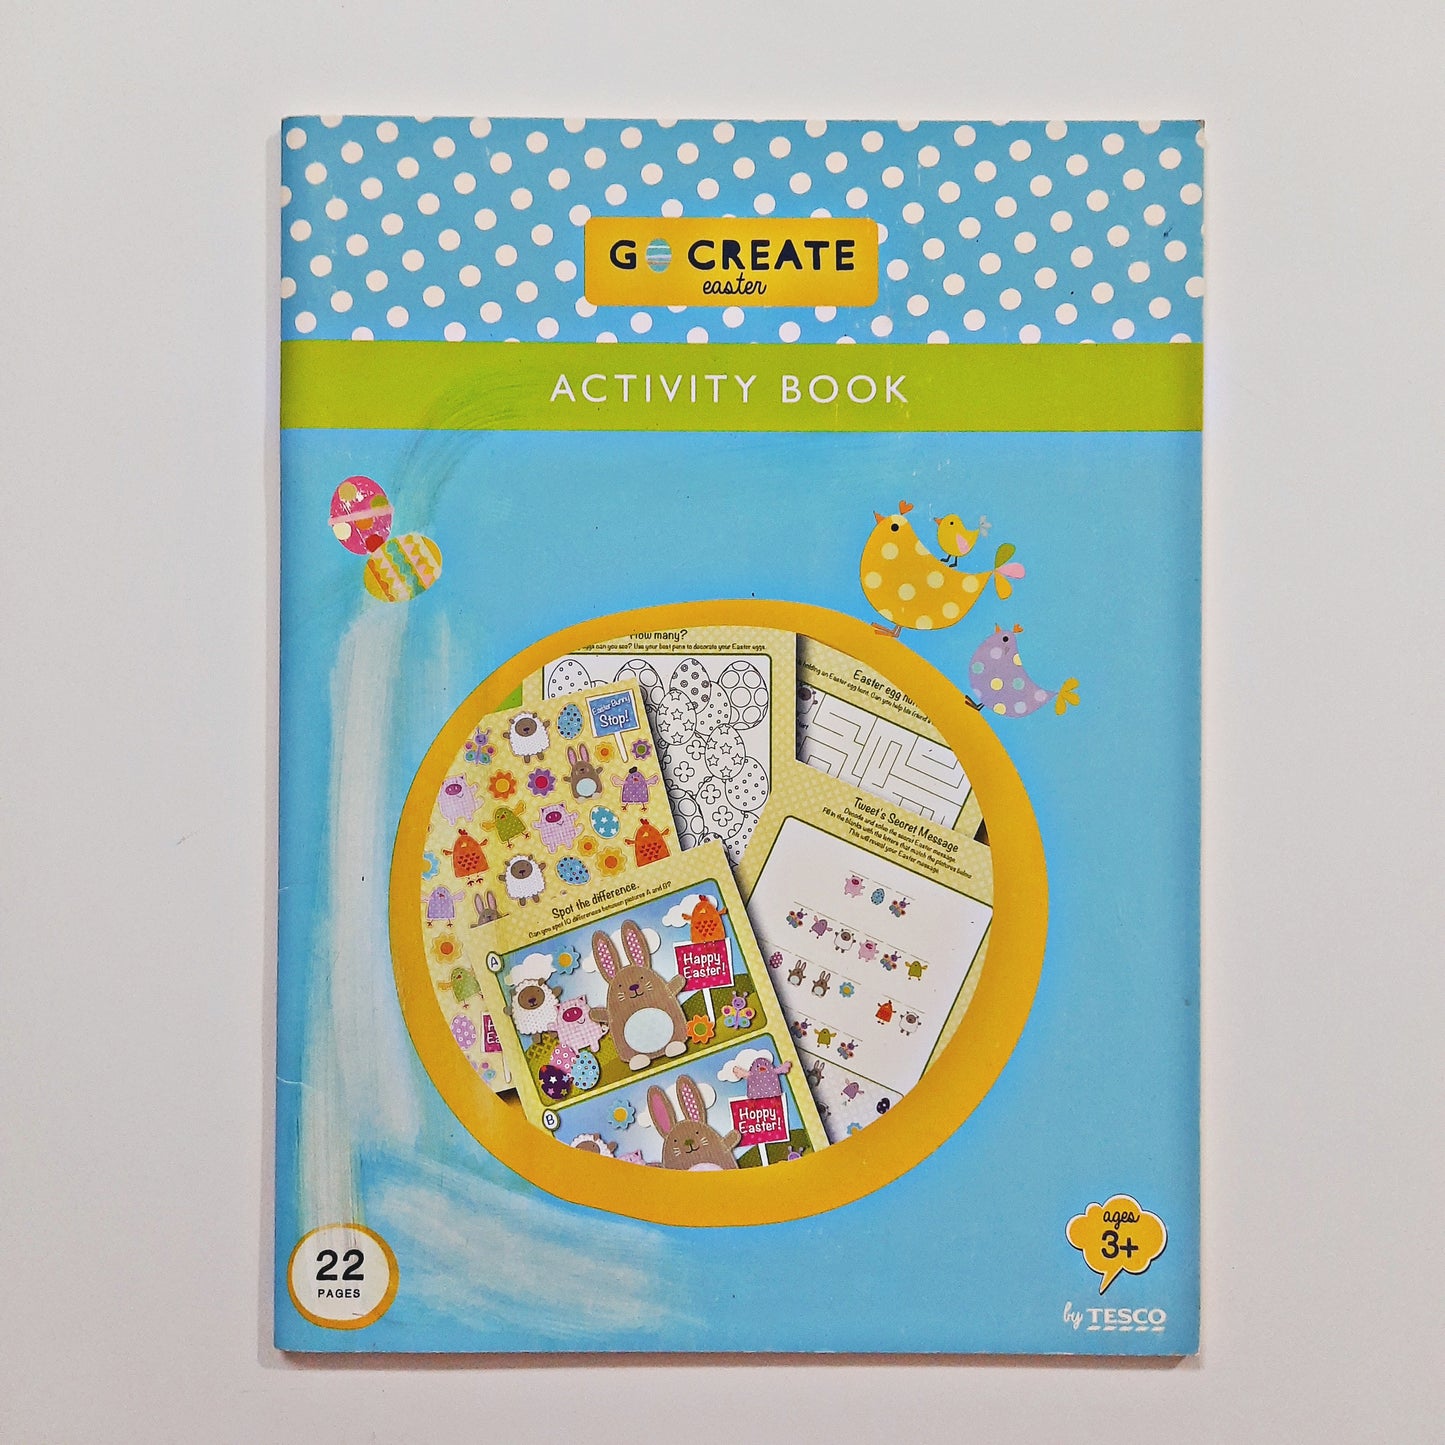 Activity Book with Stickers, Press outs